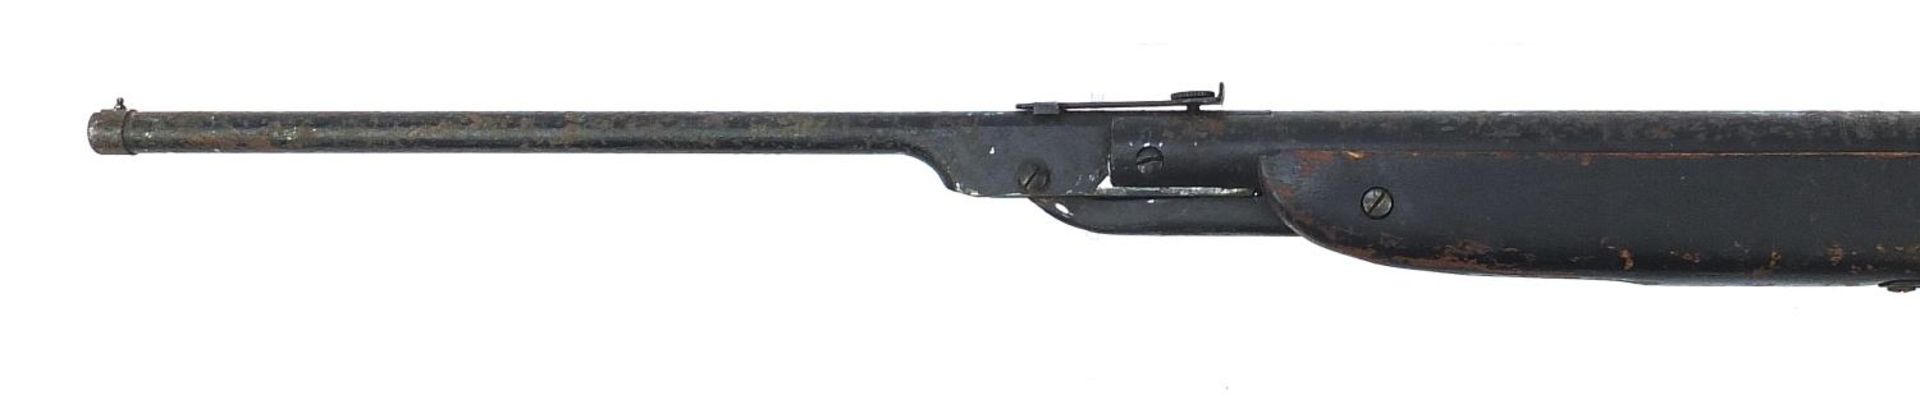 **WITHDRAWN** Vintage Webley Junior air rifle, 92cm in length :For Further Condition Reports Please - Image 7 of 7